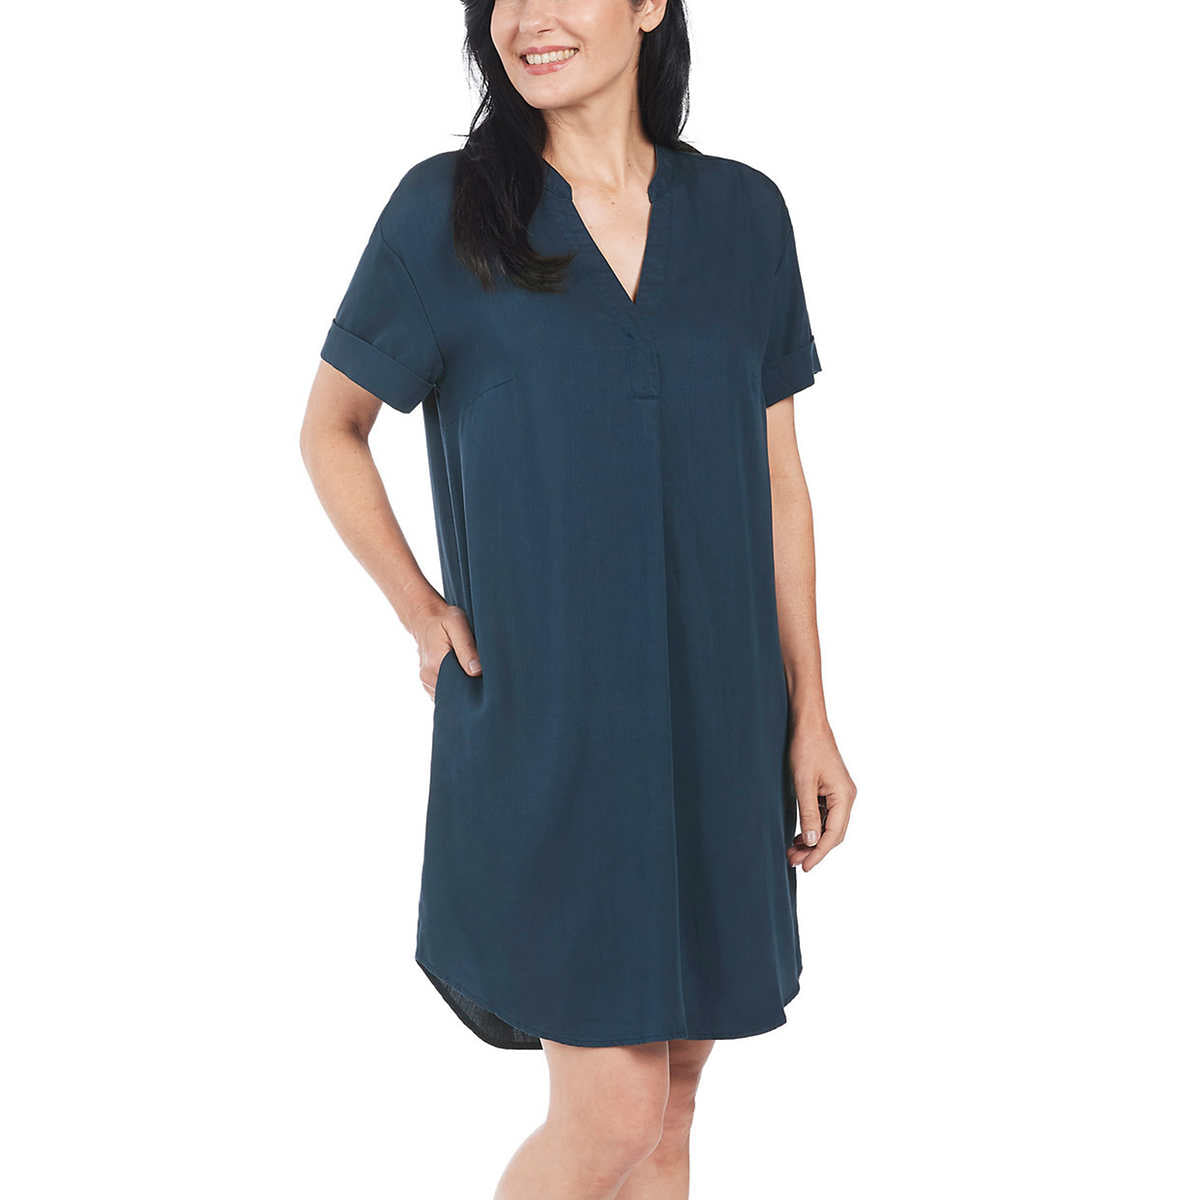 Hilary Radley Dresses for Women - GTM Discount General Stores